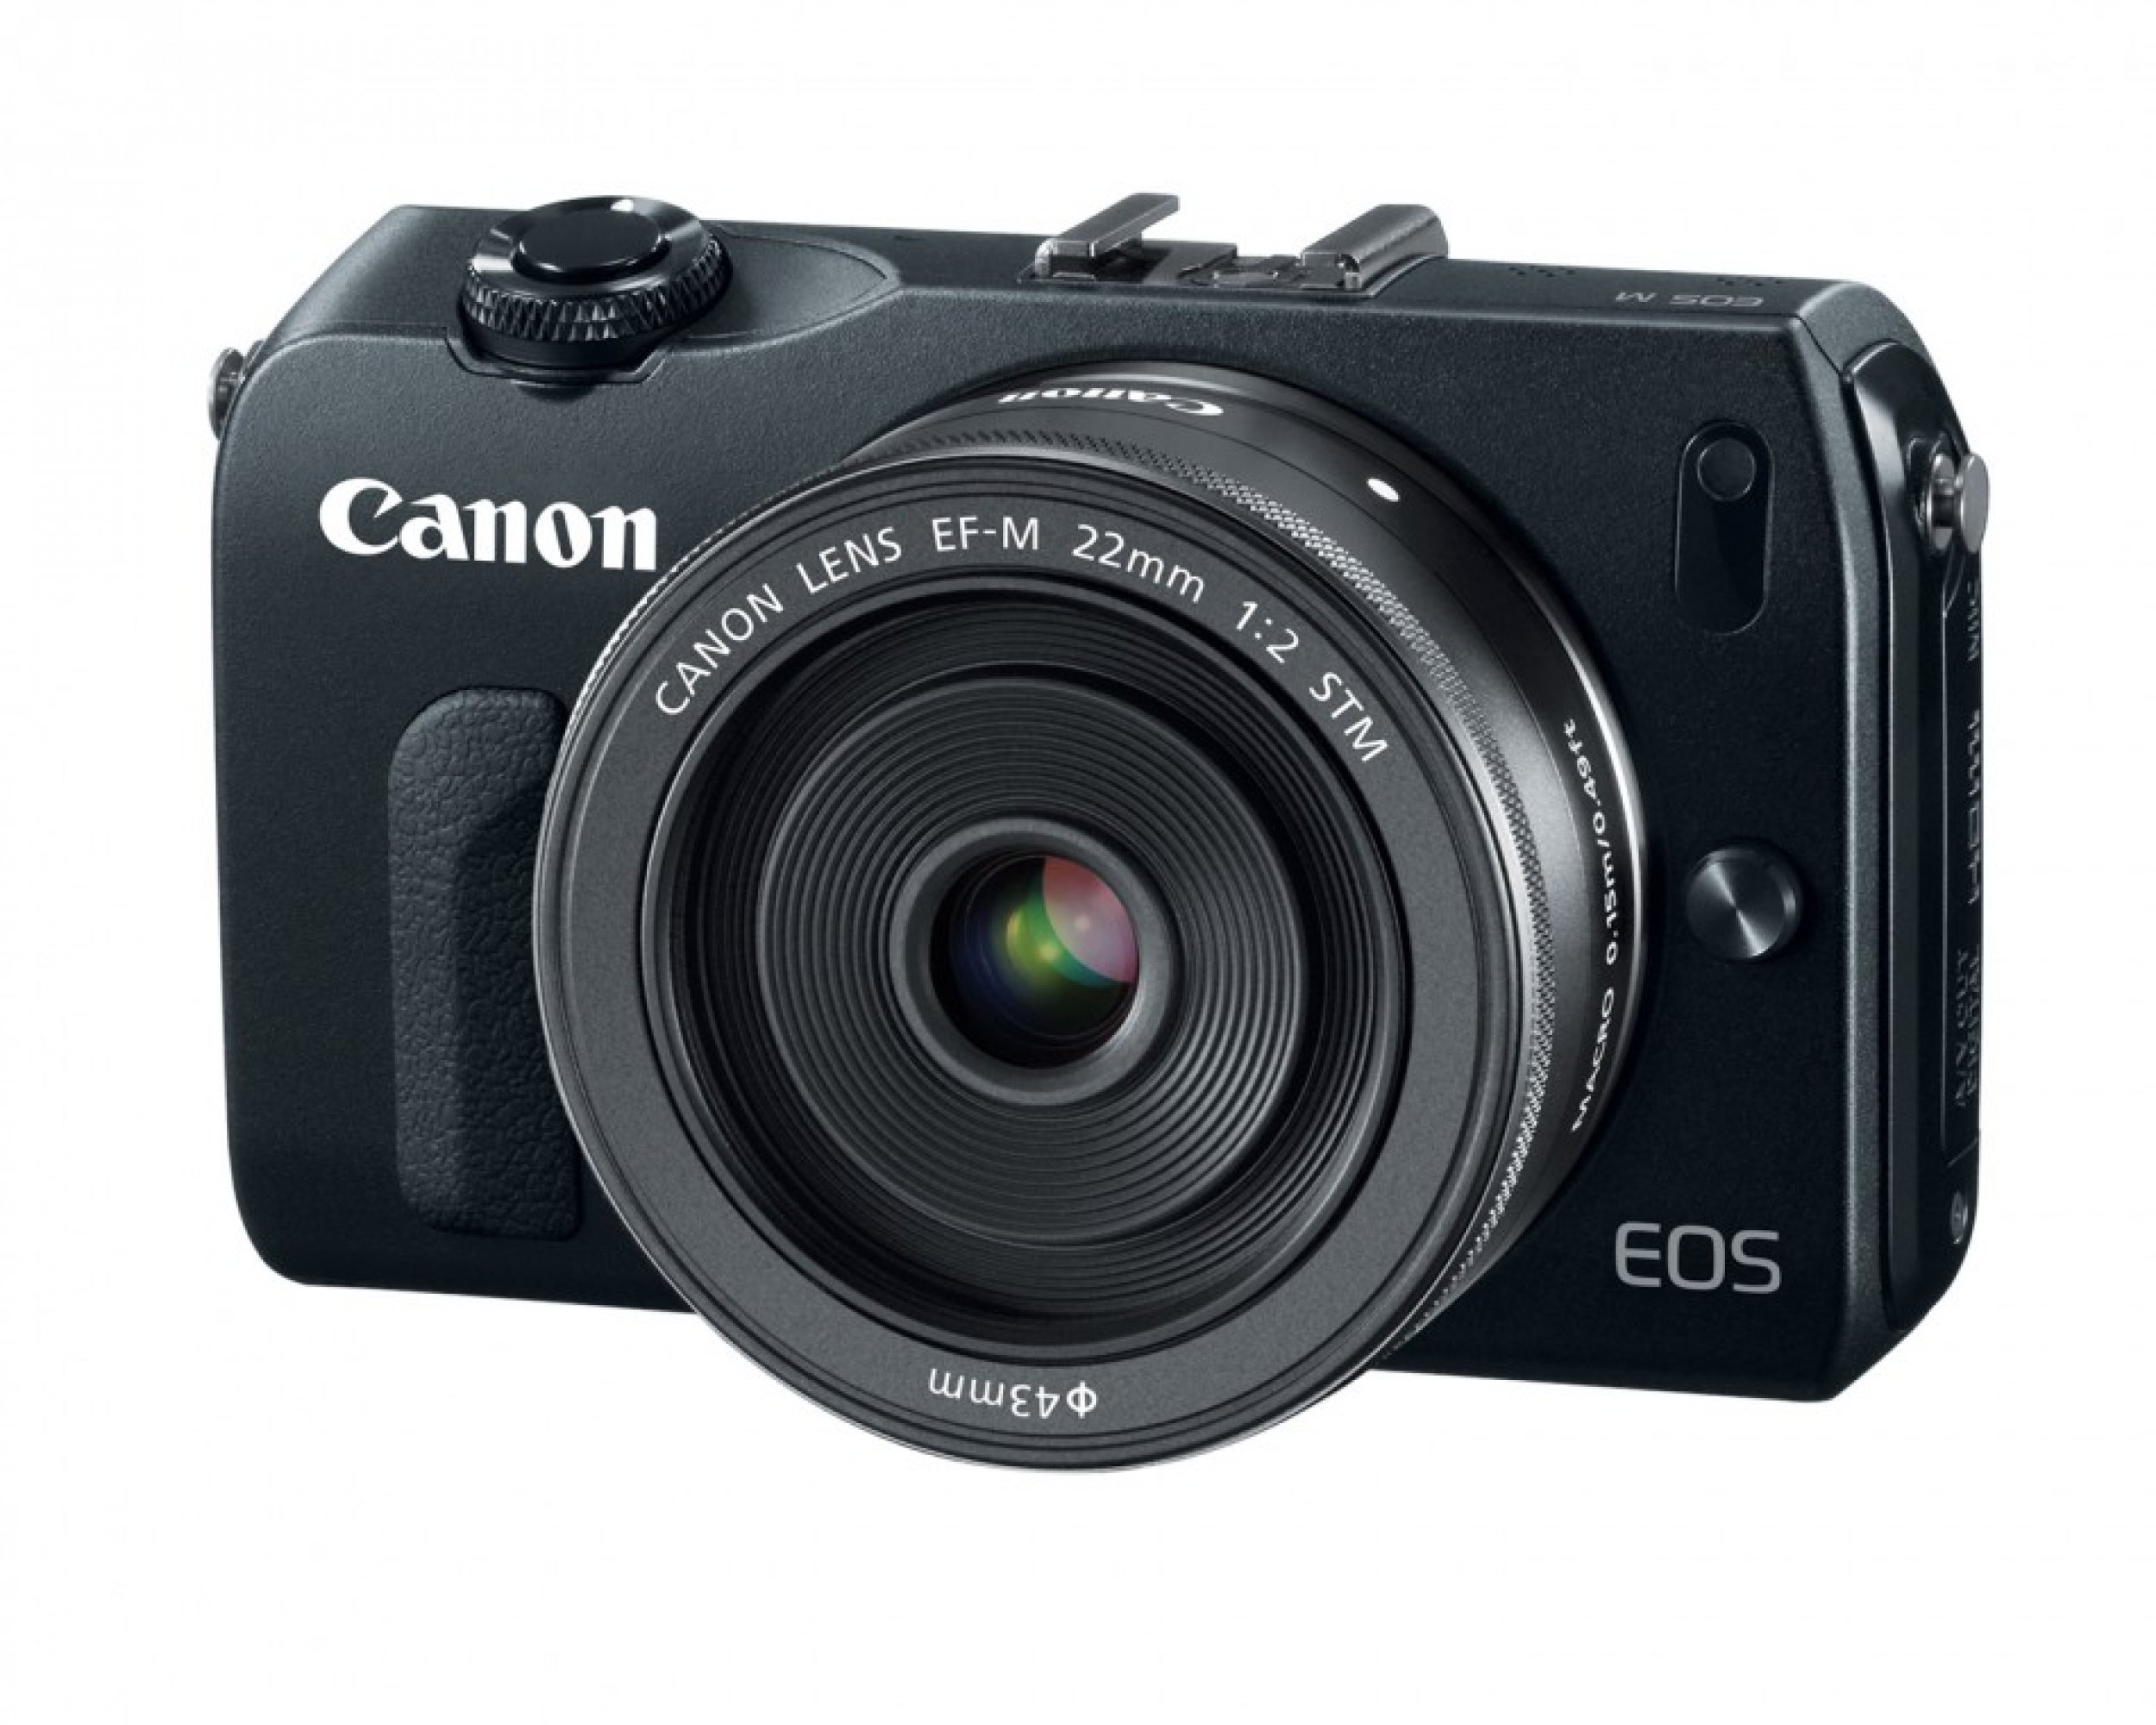 Canon Announces 18 Megapixel EOS M Mirrorless Camera Releasing In October At 799.99